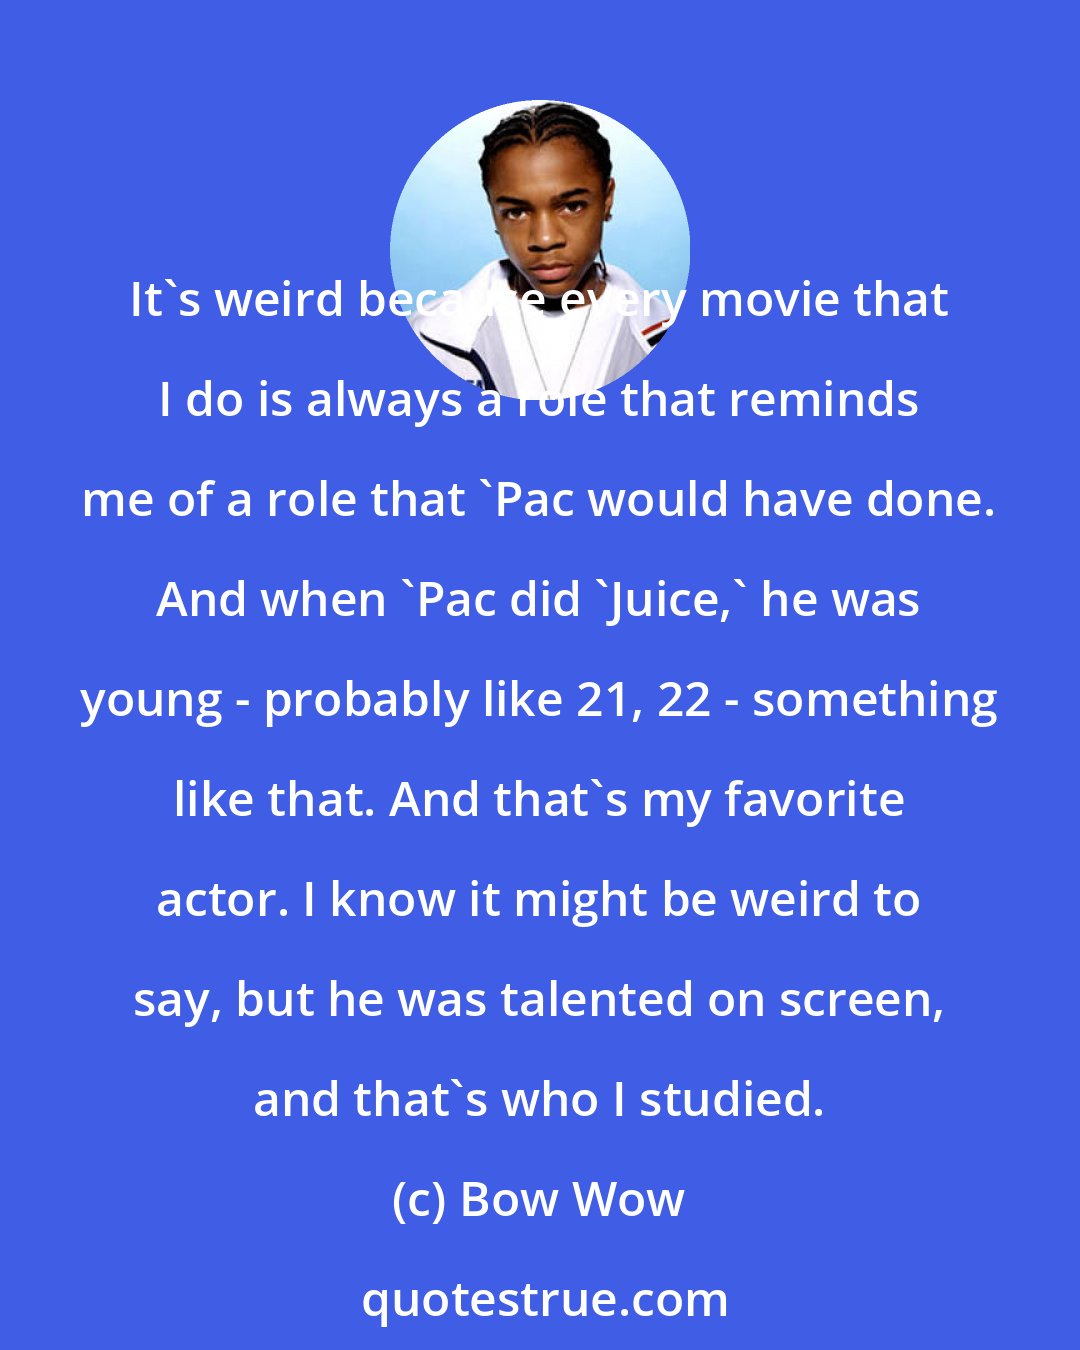 Bow Wow: It's weird because every movie that I do is always a role that reminds me of a role that 'Pac would have done. And when 'Pac did 'Juice,' he was young - probably like 21, 22 - something like that. And that's my favorite actor. I know it might be weird to say, but he was talented on screen, and that's who I studied.